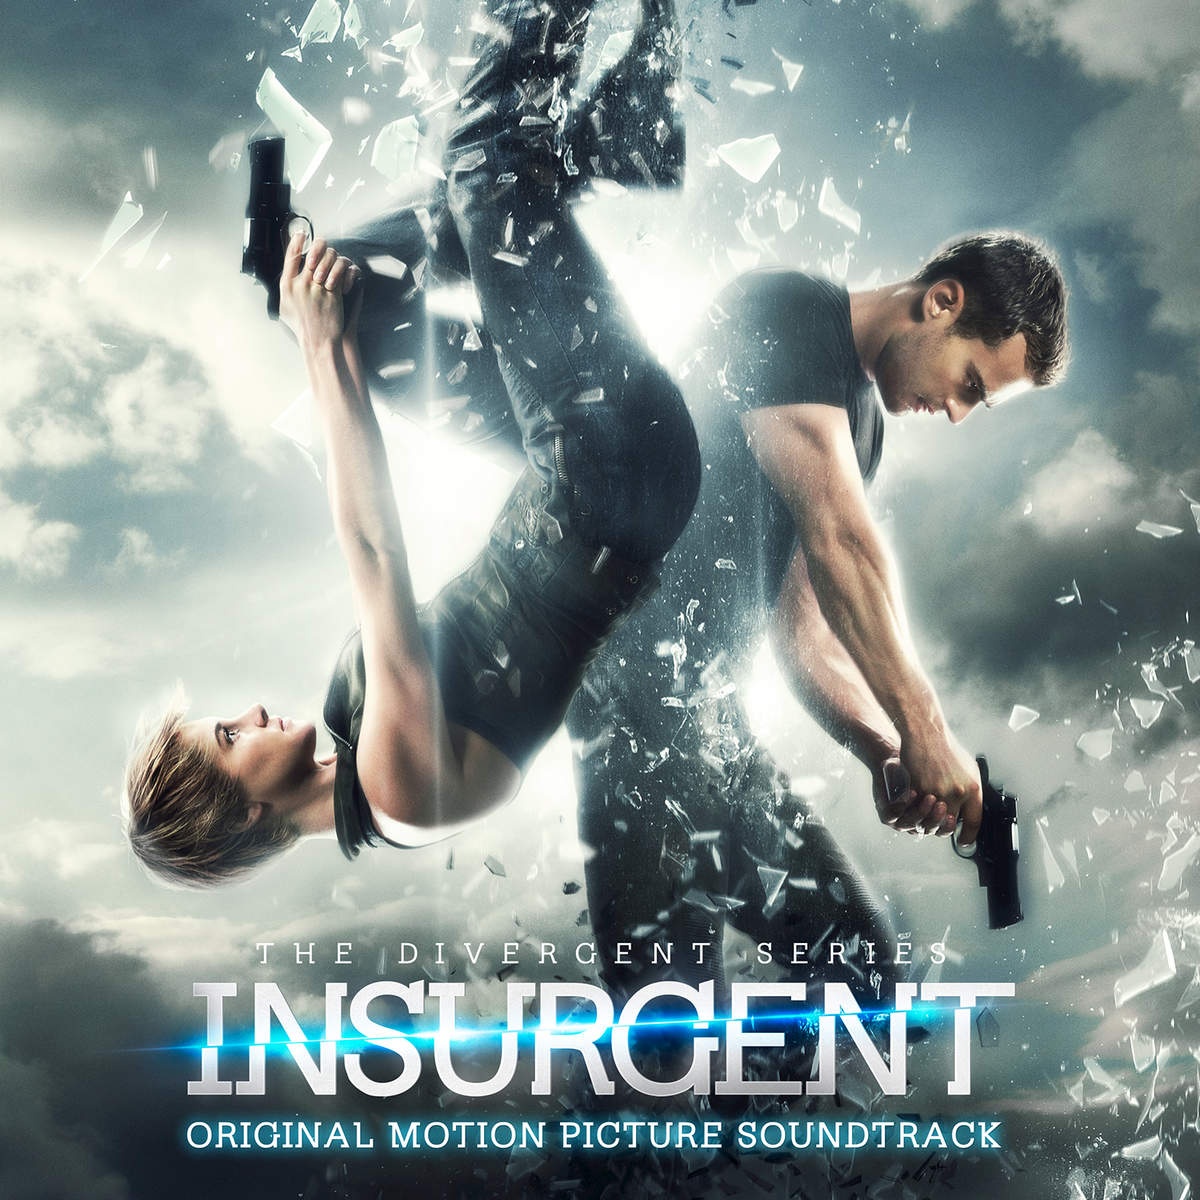 Holes In the Sky (From The "Insurgent" Soundtrack)